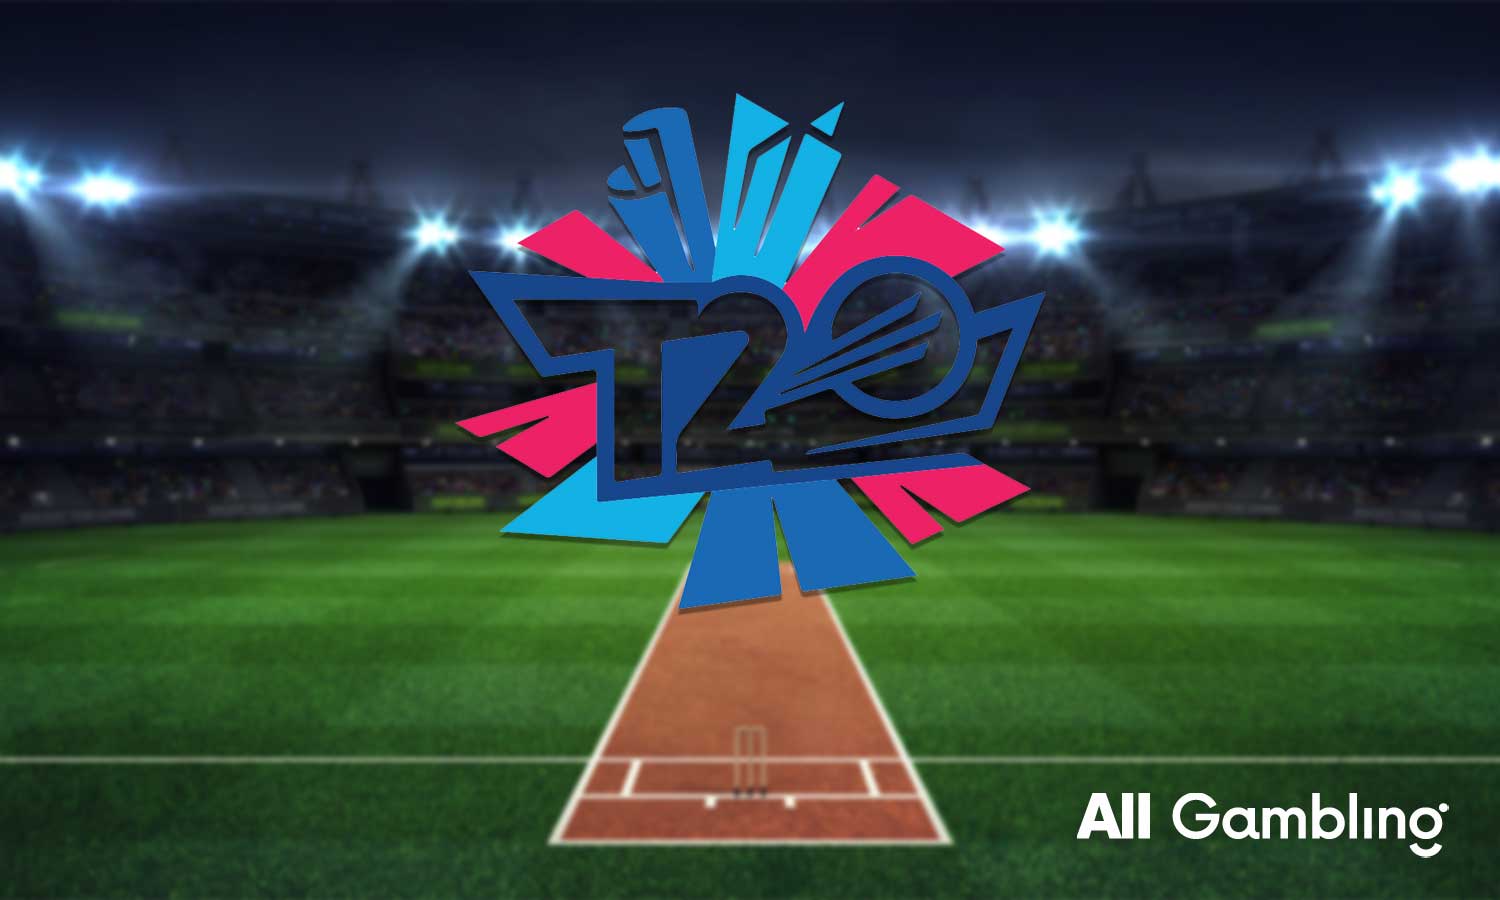 T20 World Cup Cashback Madness